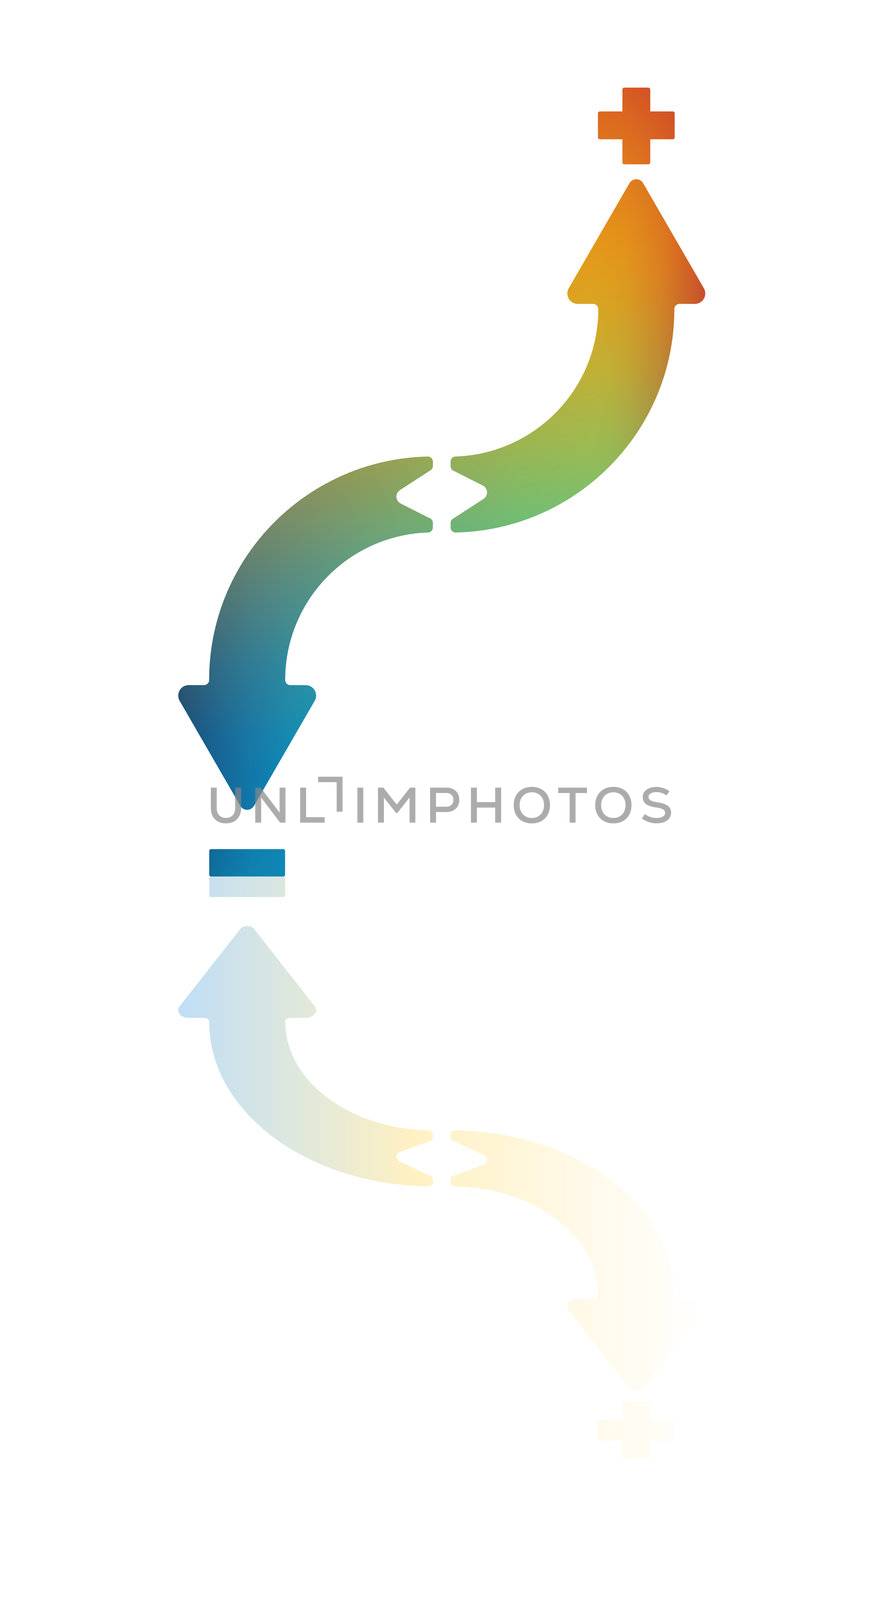 Double  Arrows Pointing to Minus and Plus Signs Bitmap Illustration